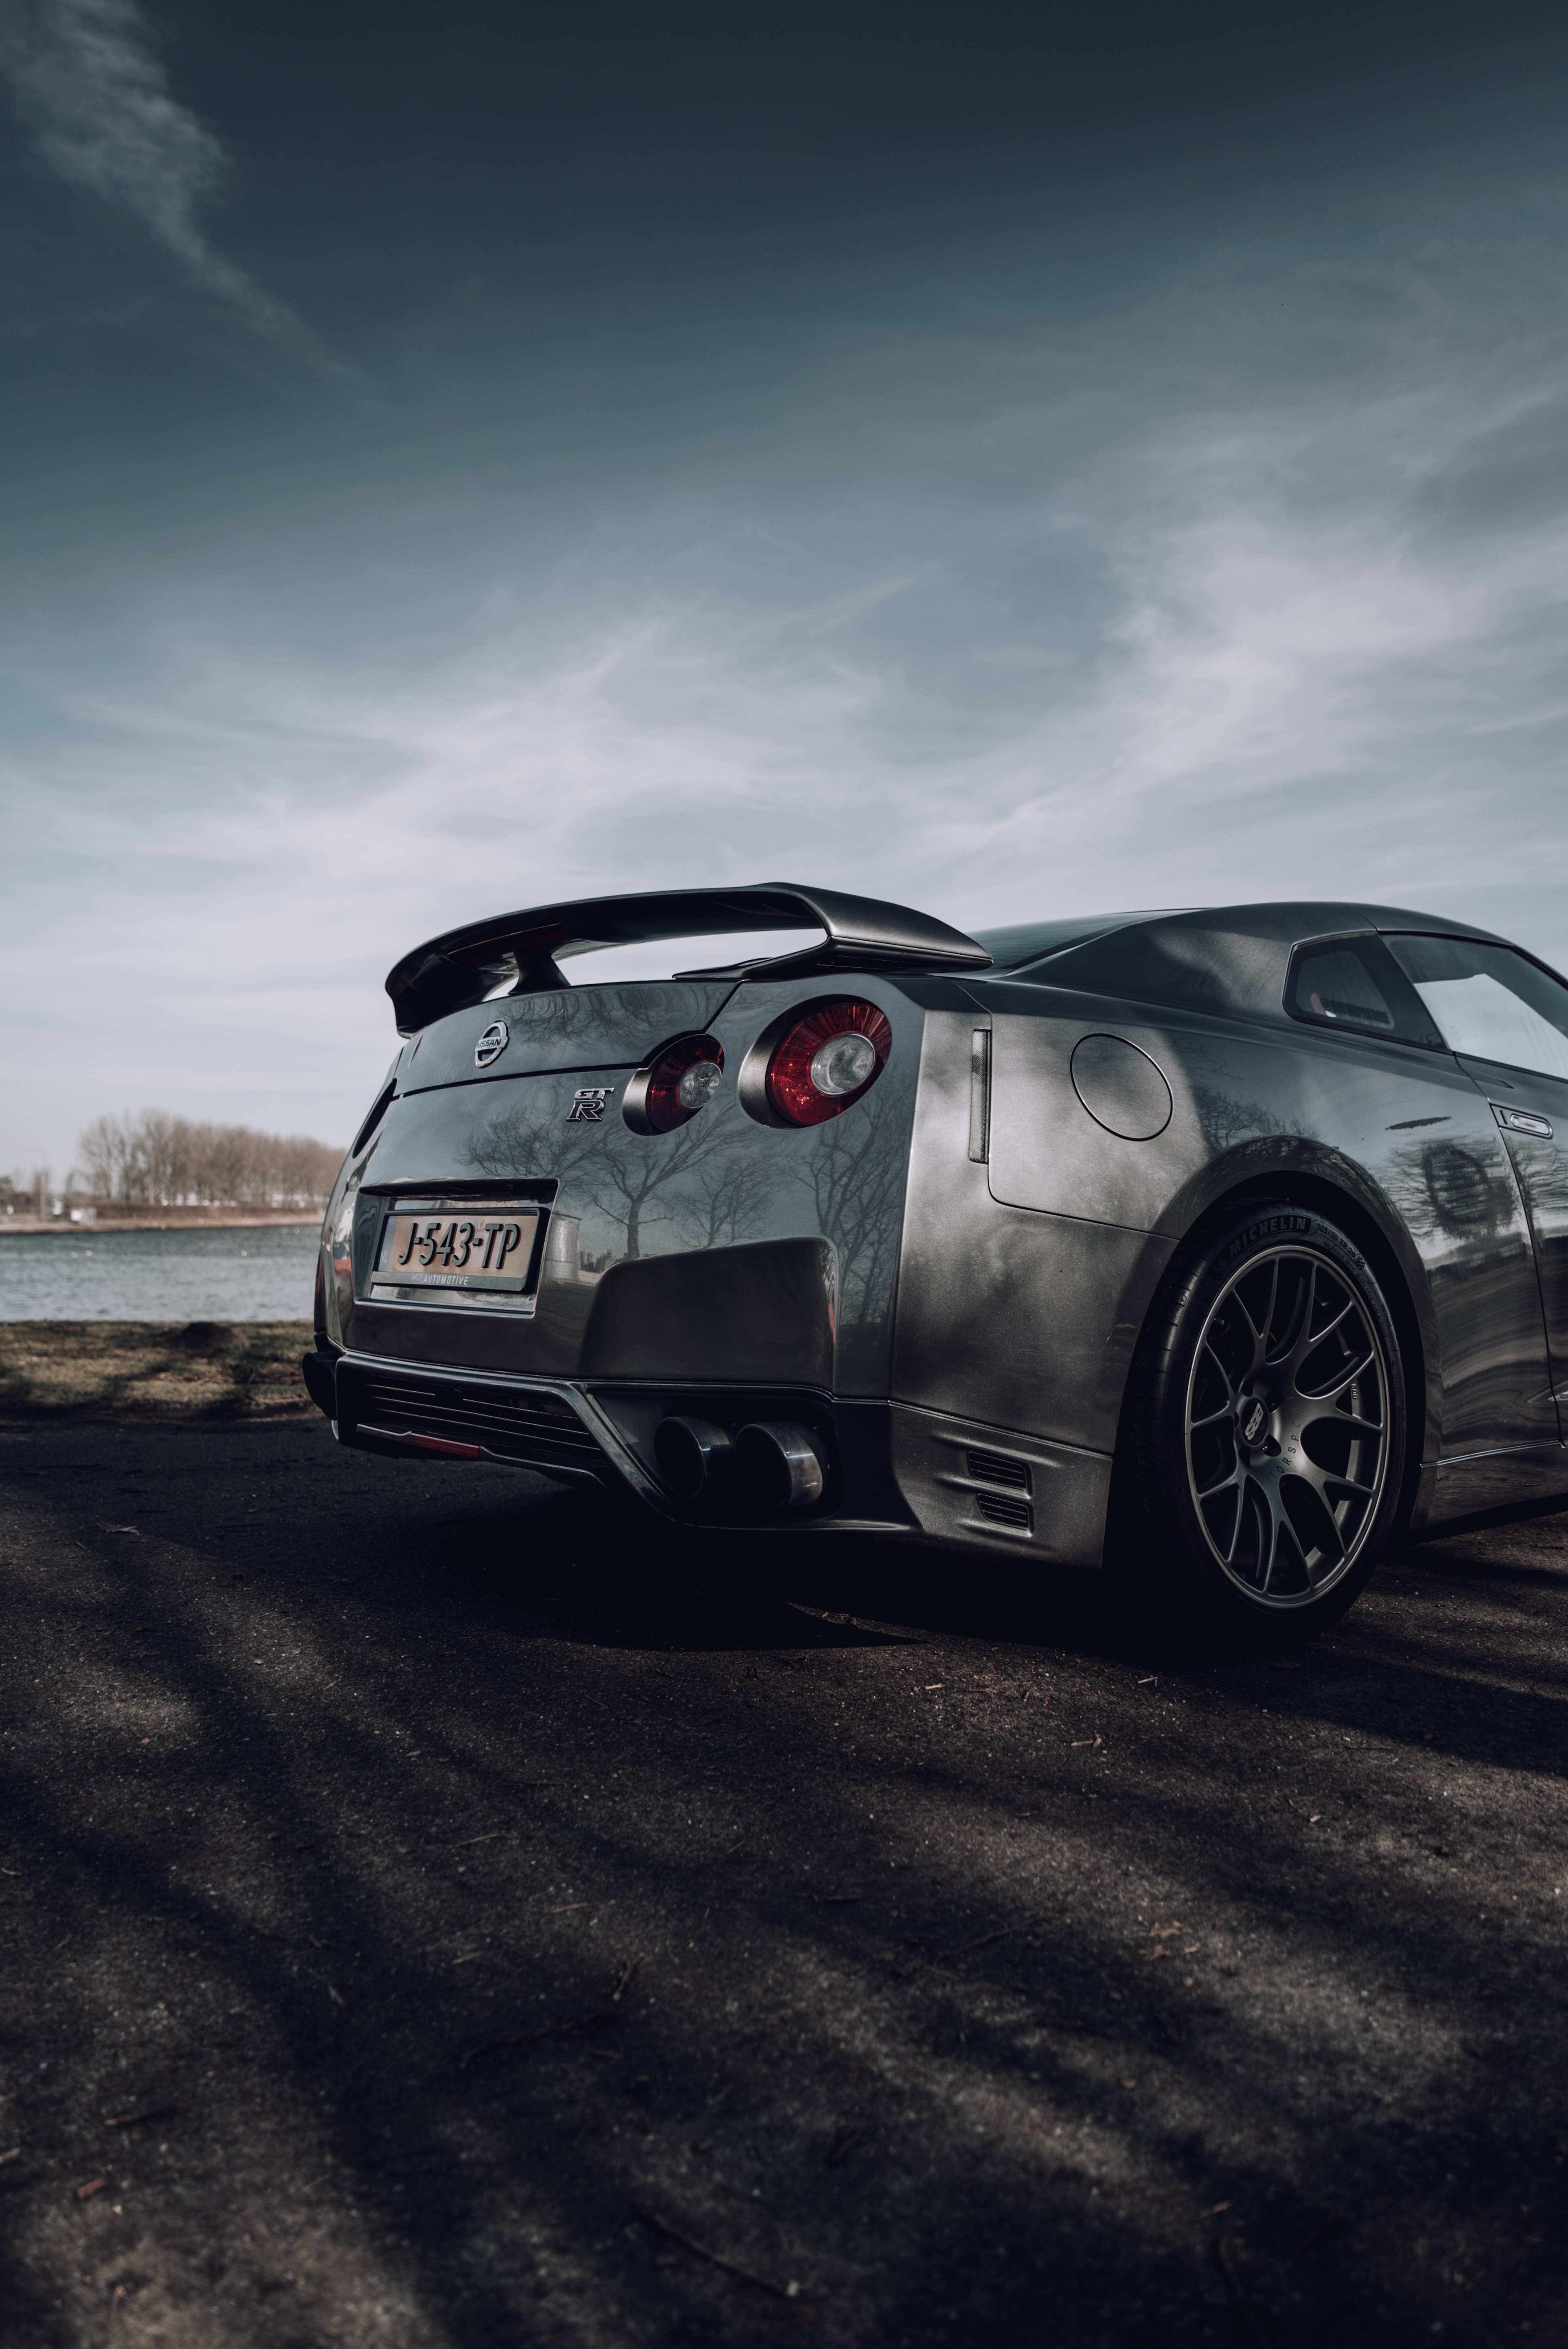 Widescreen image nissan, cars, car, side view